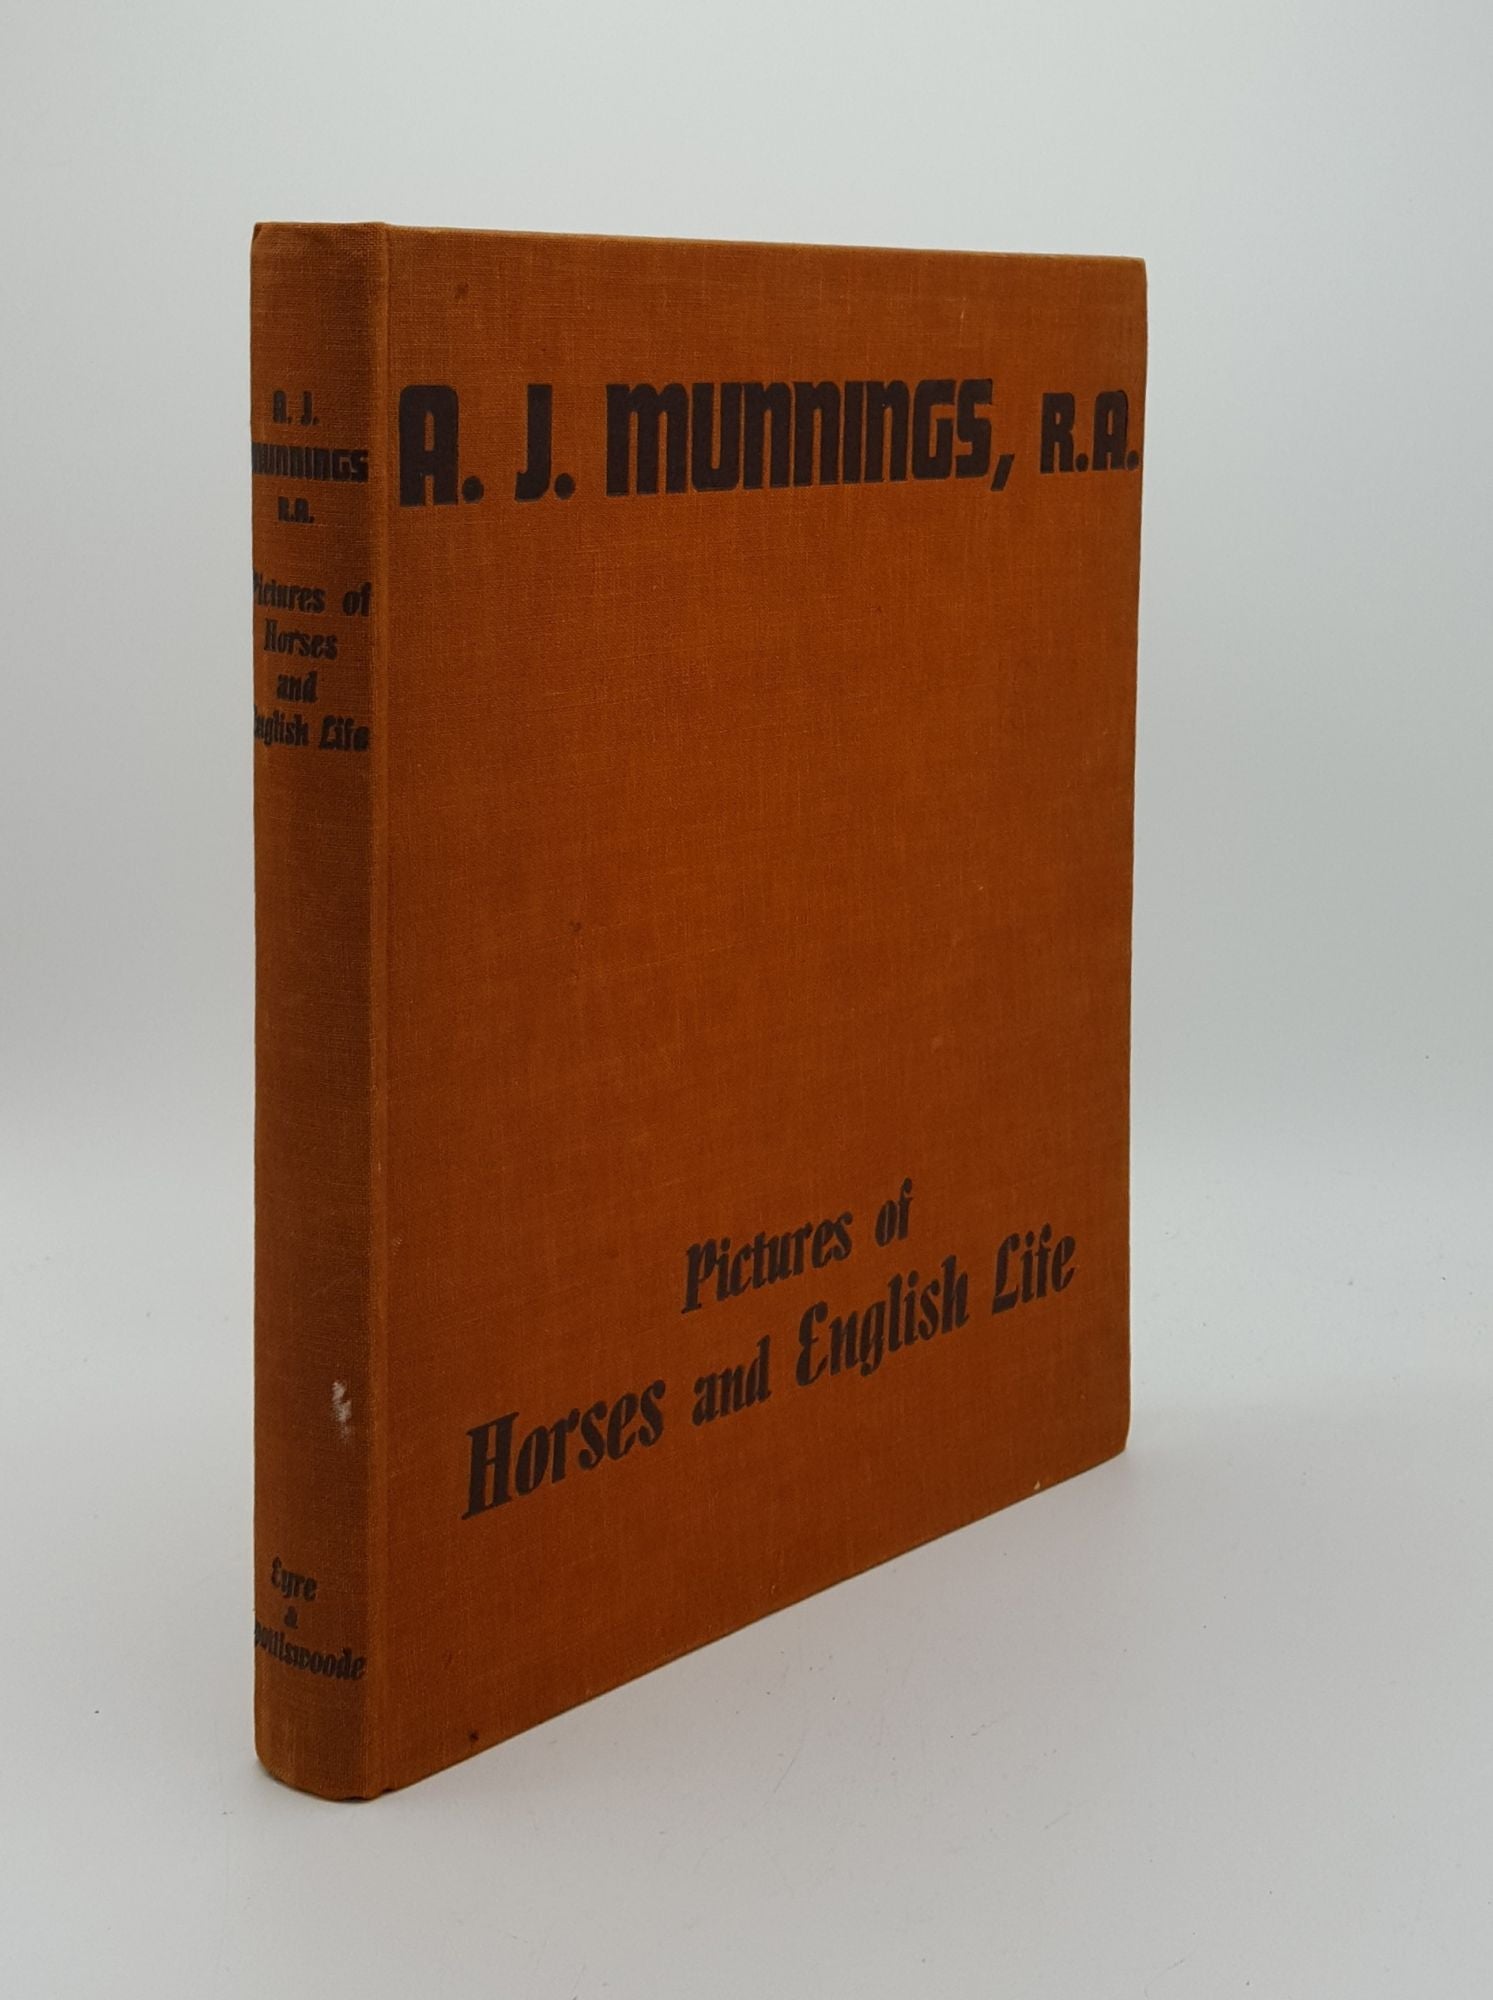 MUNNINGS A.J. - Pictures of Horses and English Life